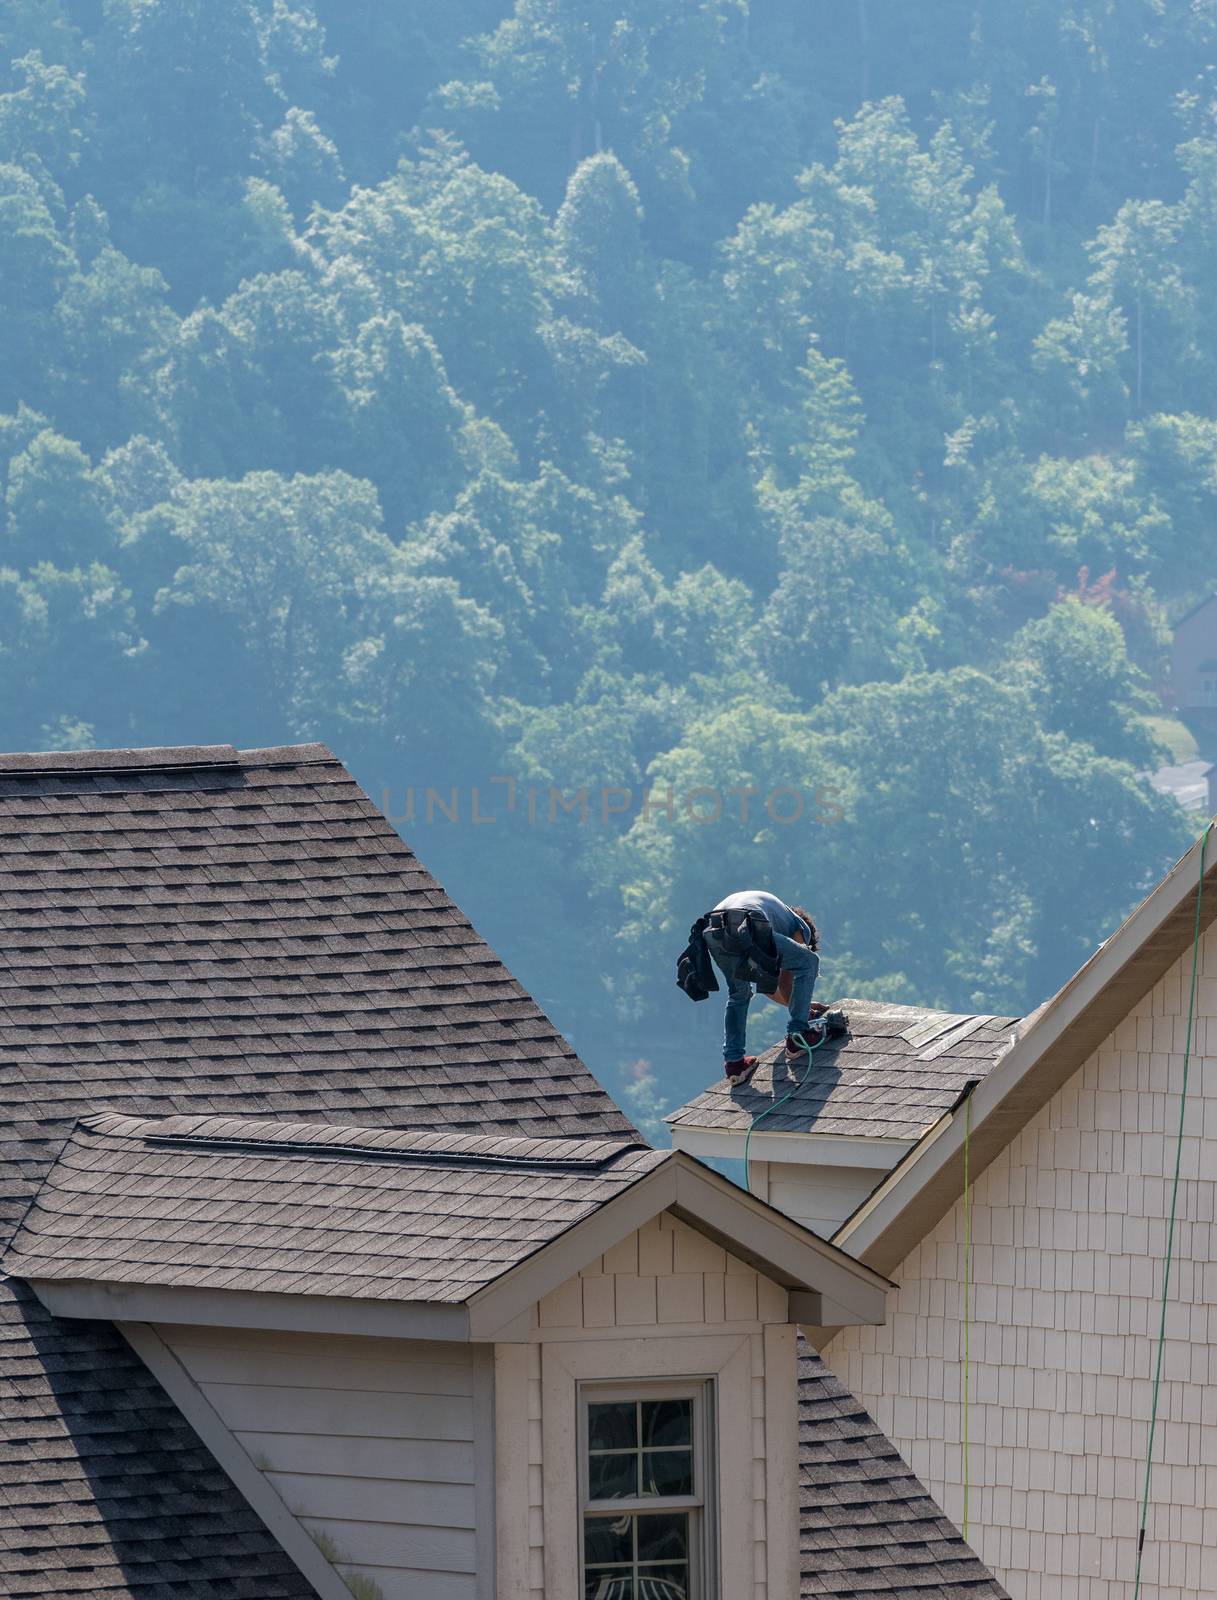 Young roofing contractor replacing the old shingles on a townhouse roof high above the ground